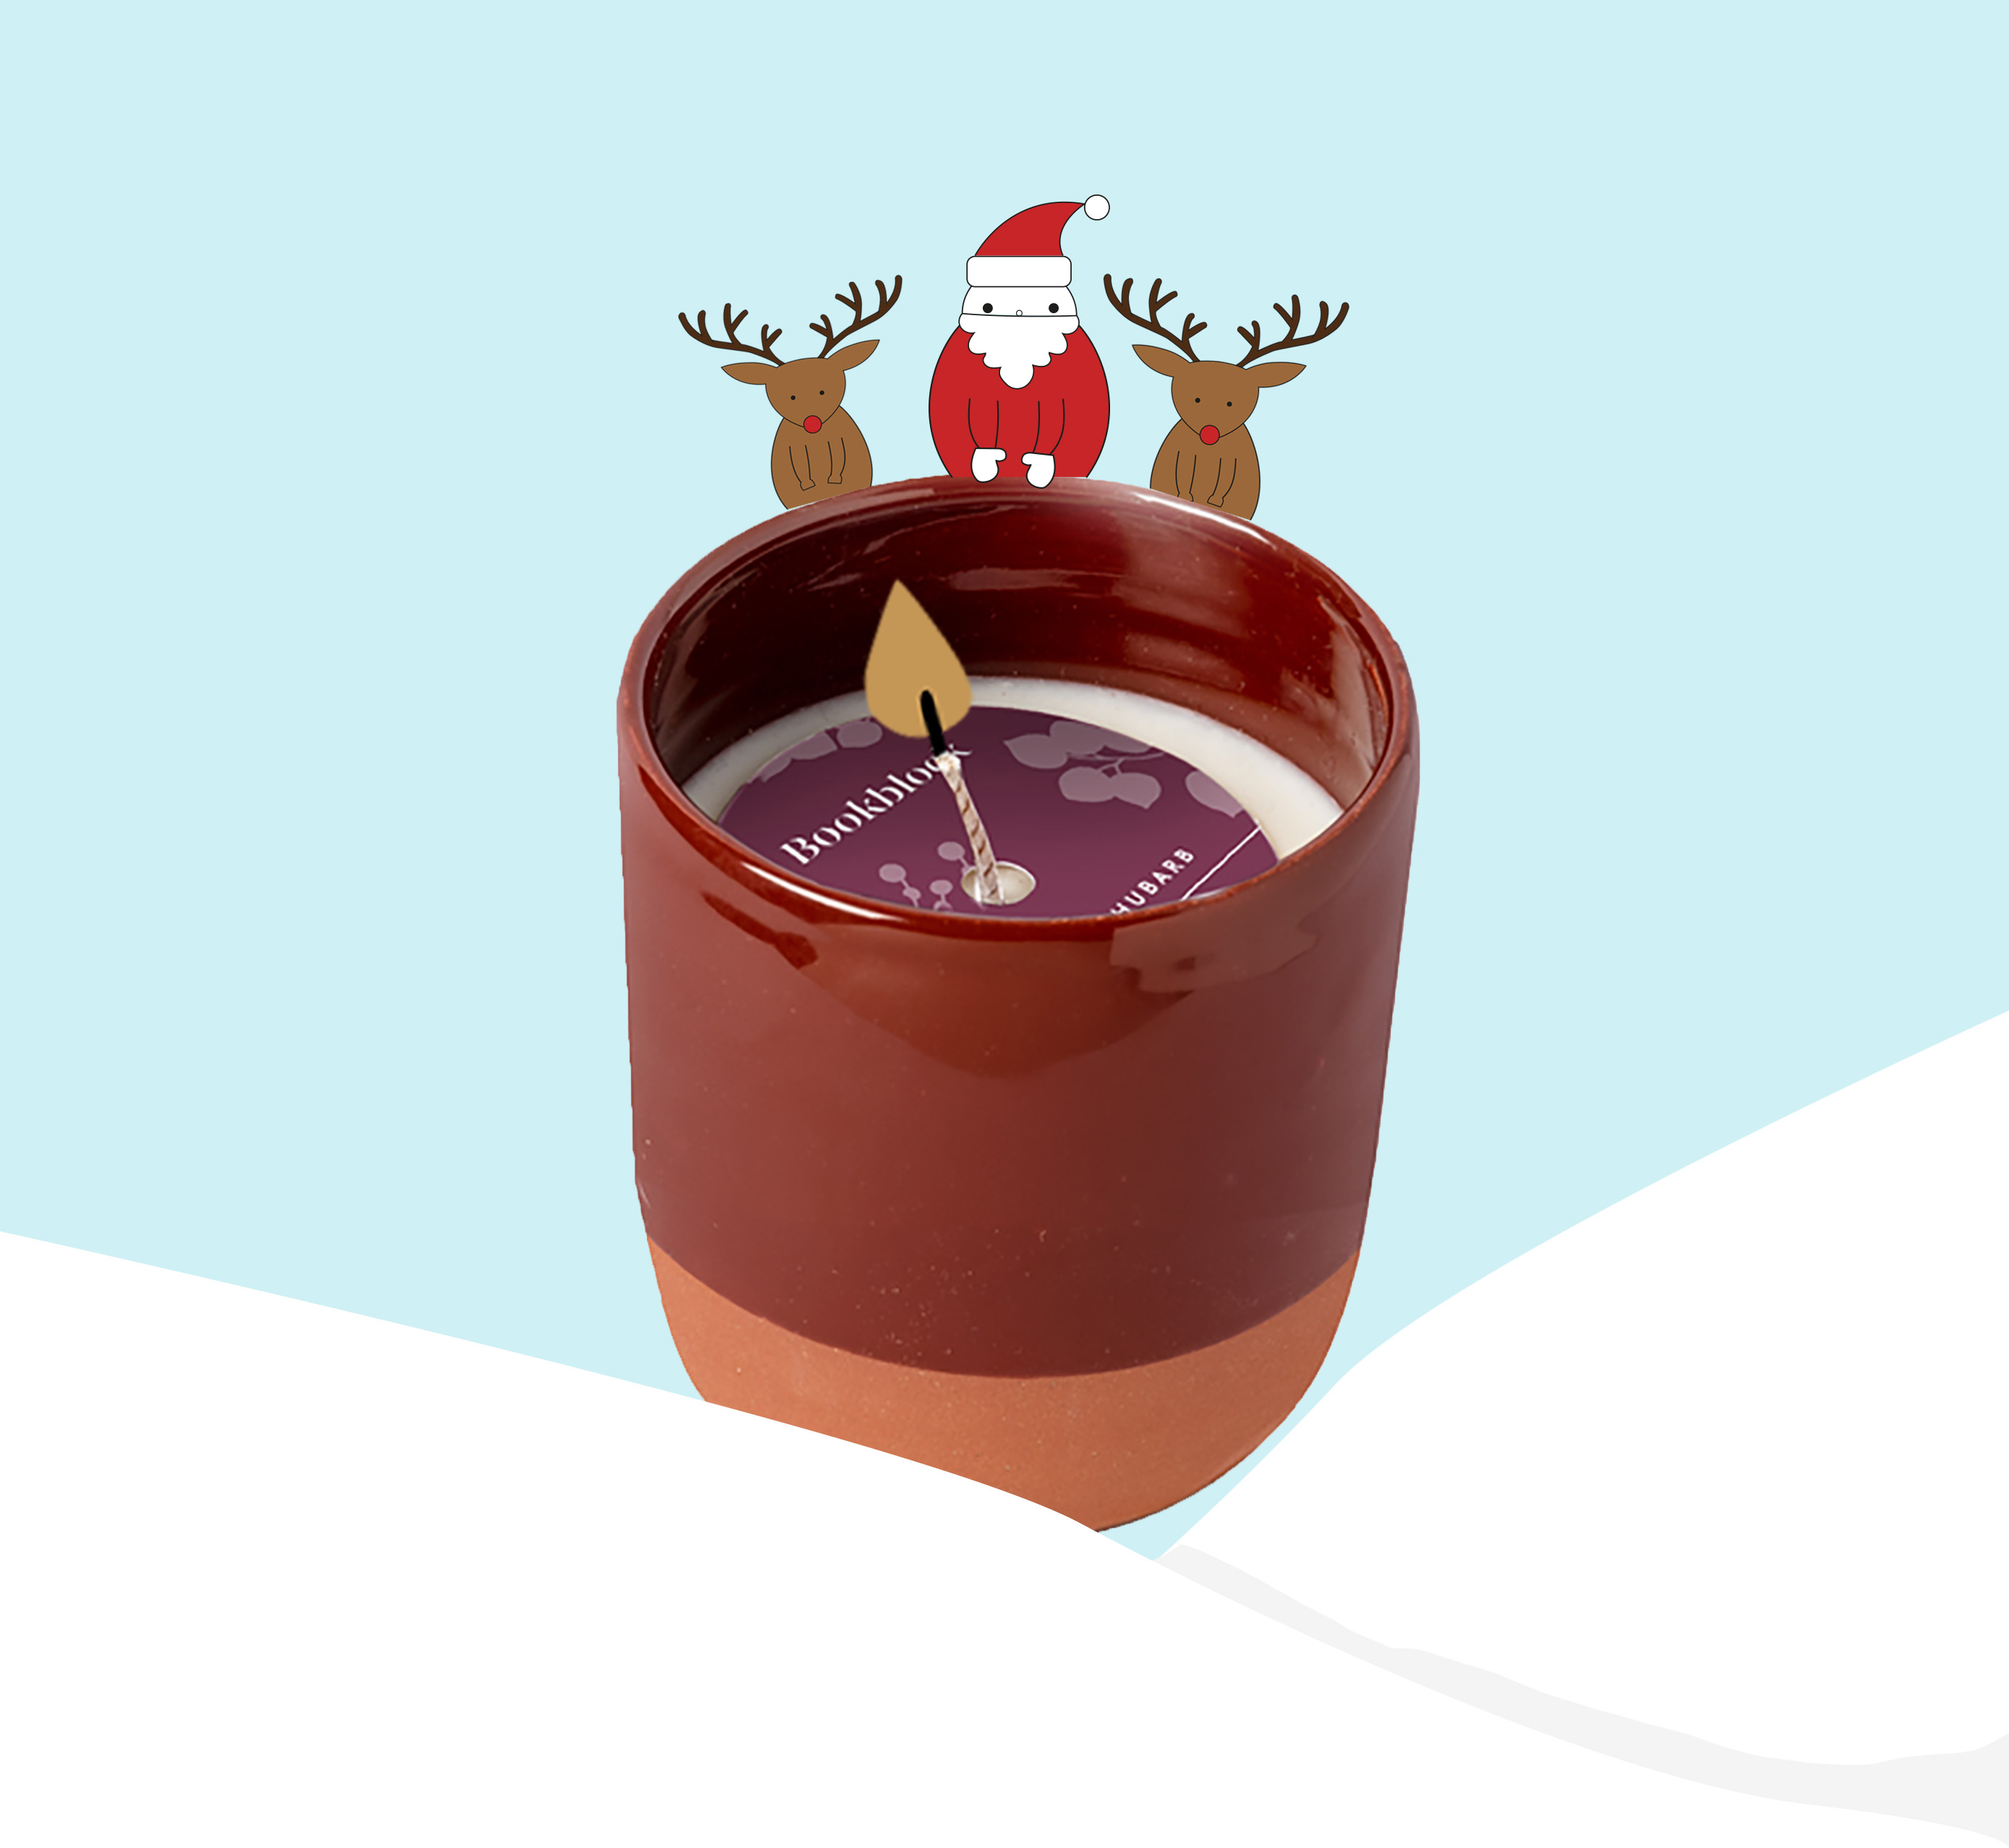 Plum and Rhubarb Candle with Santa and Reindeer illustrations and snow hills